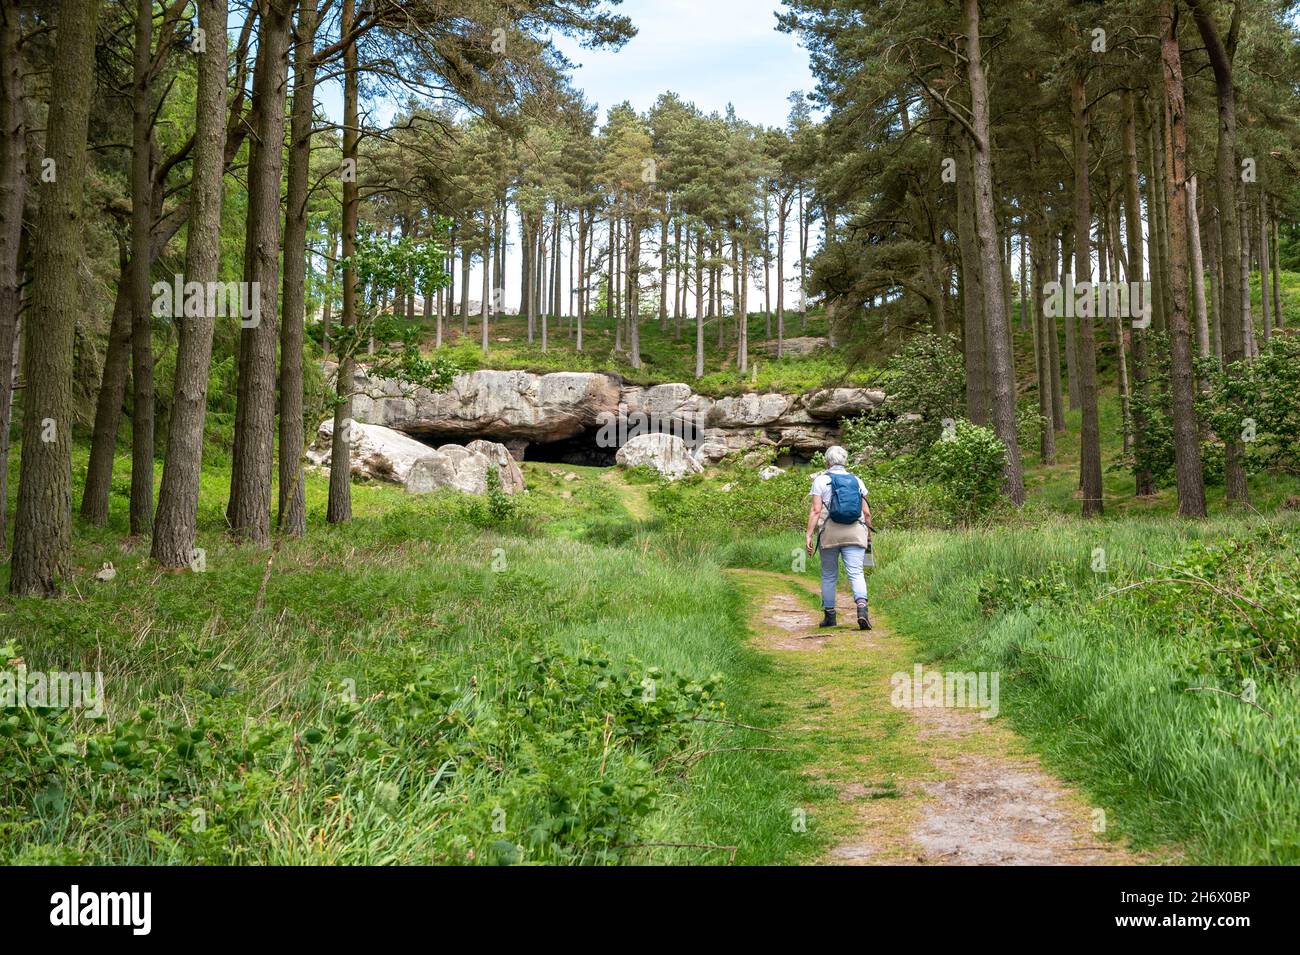 St Cuthbert's cave (St Cuthber's way) where the monk and followers from Holy Isle hid from the Viking invaders. A hiker approaches the cave. Stock Photo